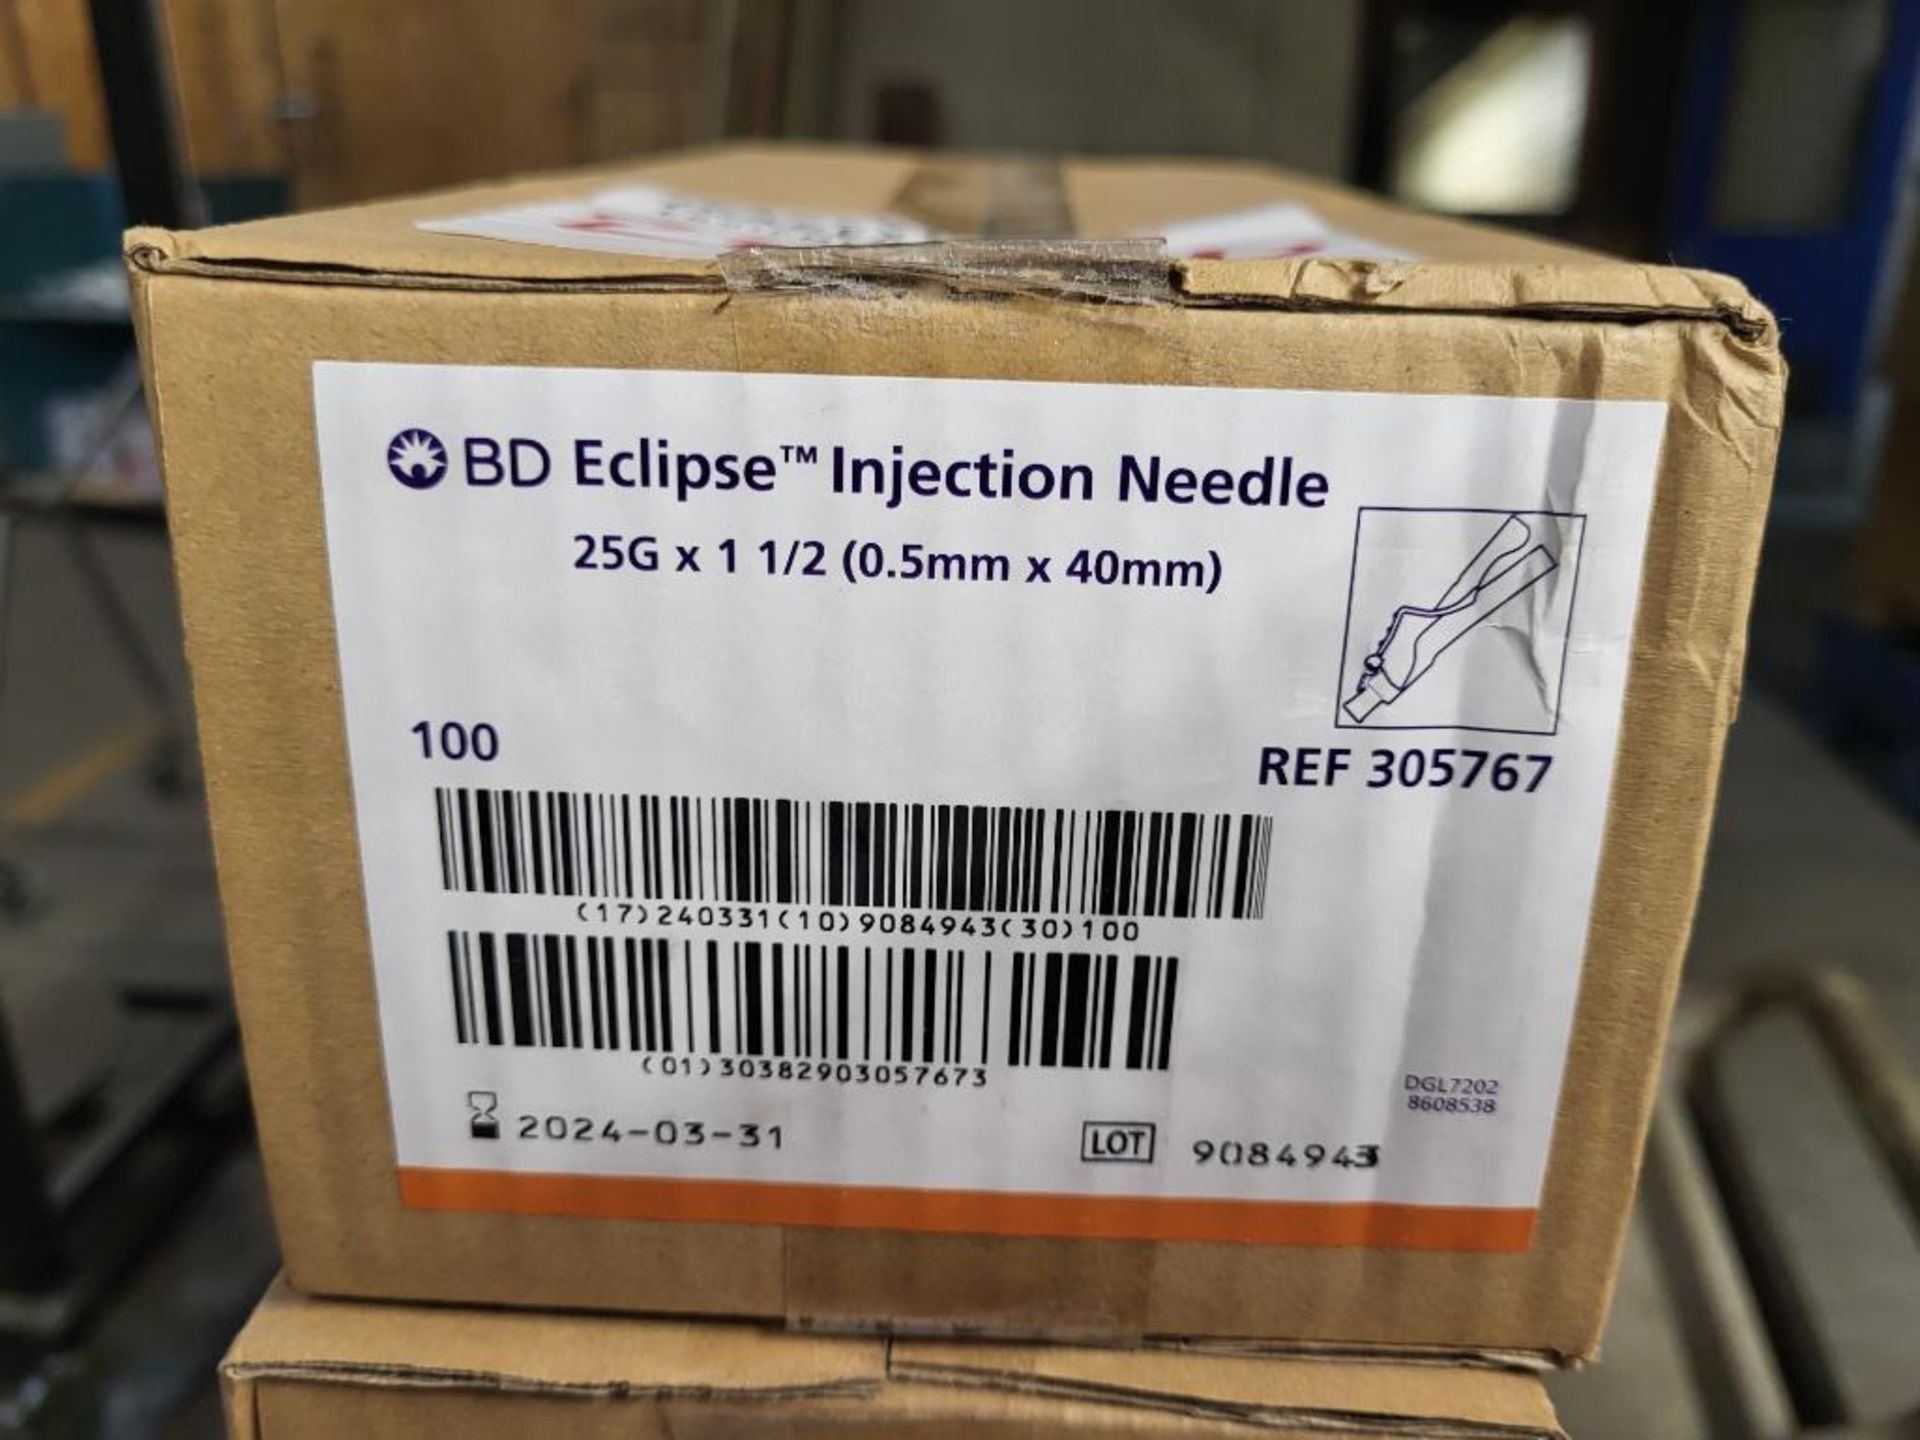 New Boxes of 100 BD Eclipse Injection Needles 25G x 1 1/2